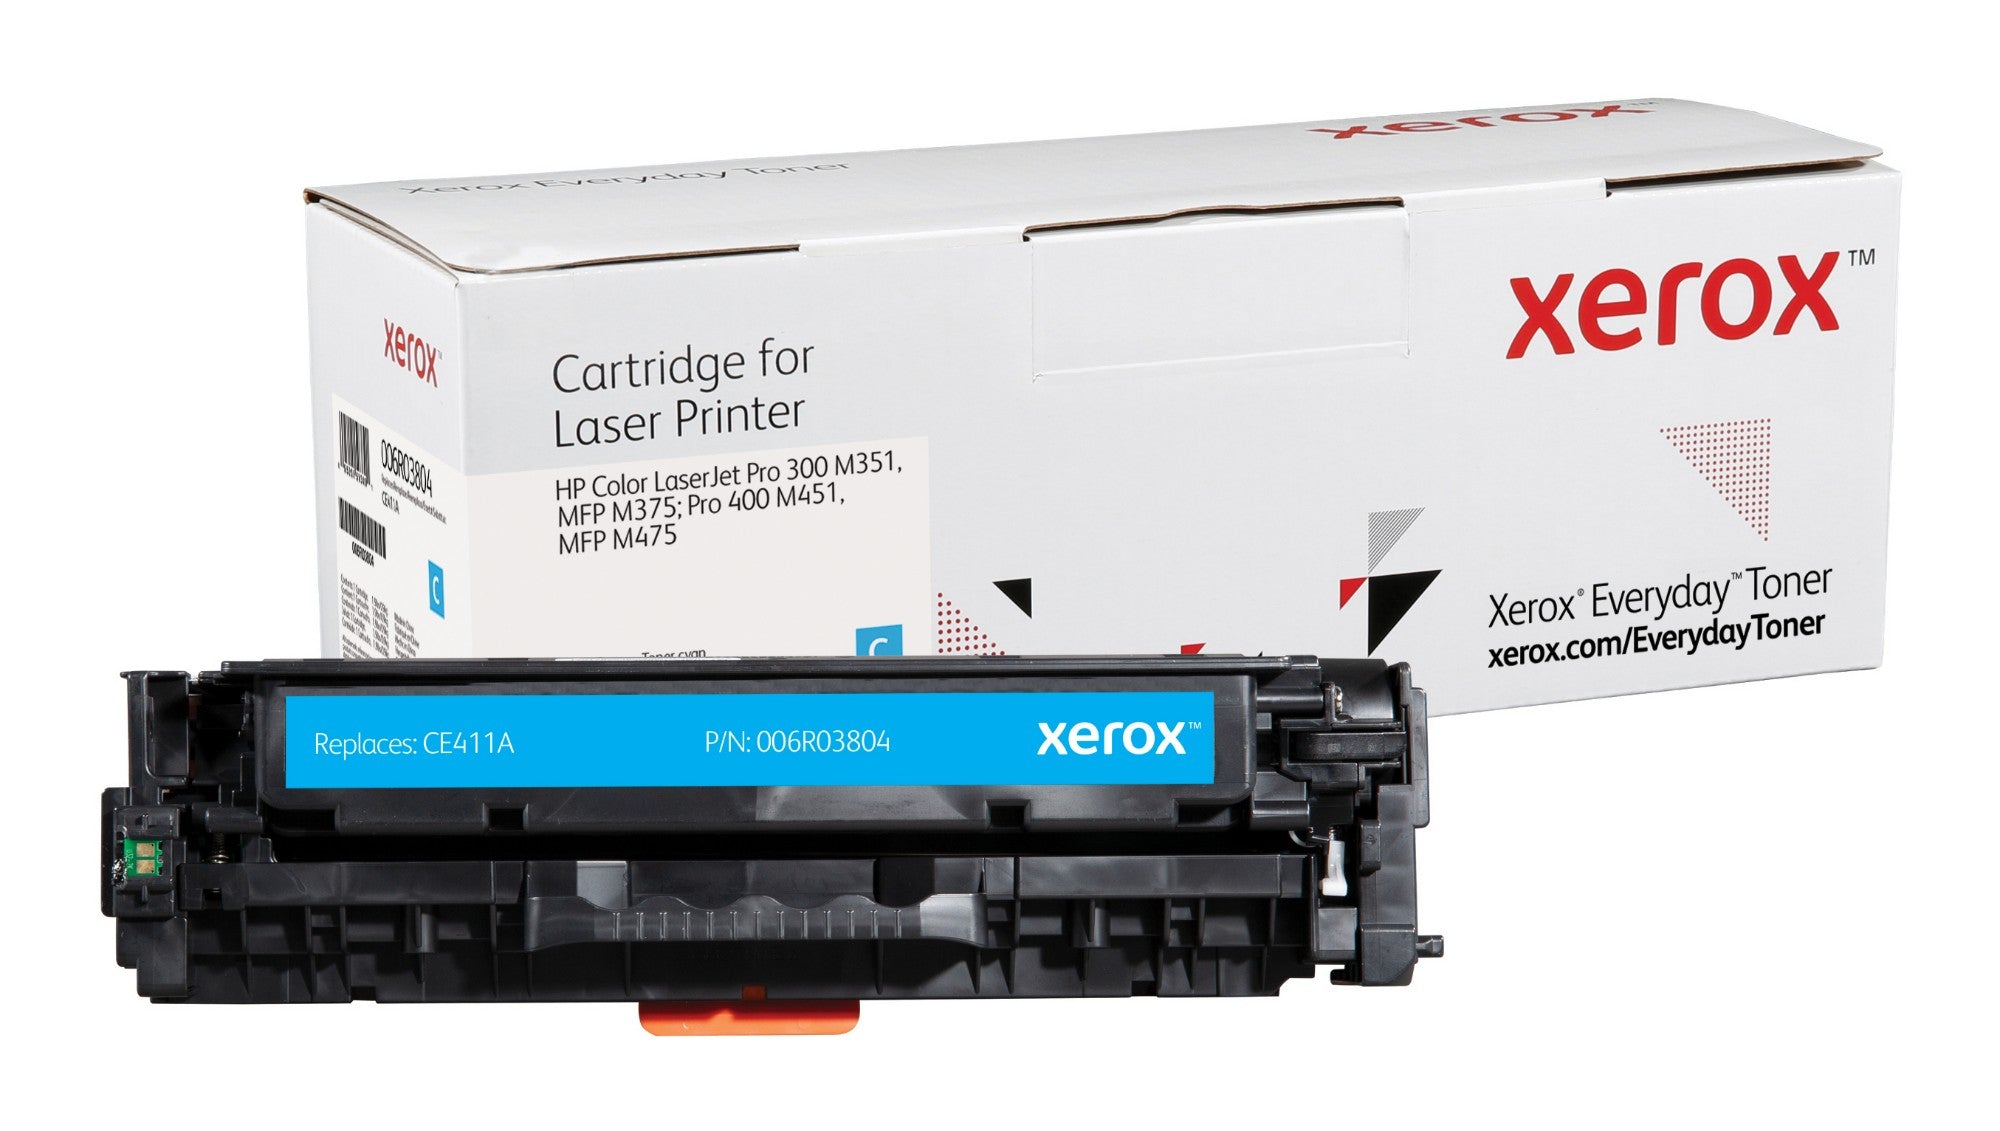 Xerox 006R03804 Toner cartridge cyan, 2.6K pages (replaces HP 305A/CE411A) for HP LaserJet M 375